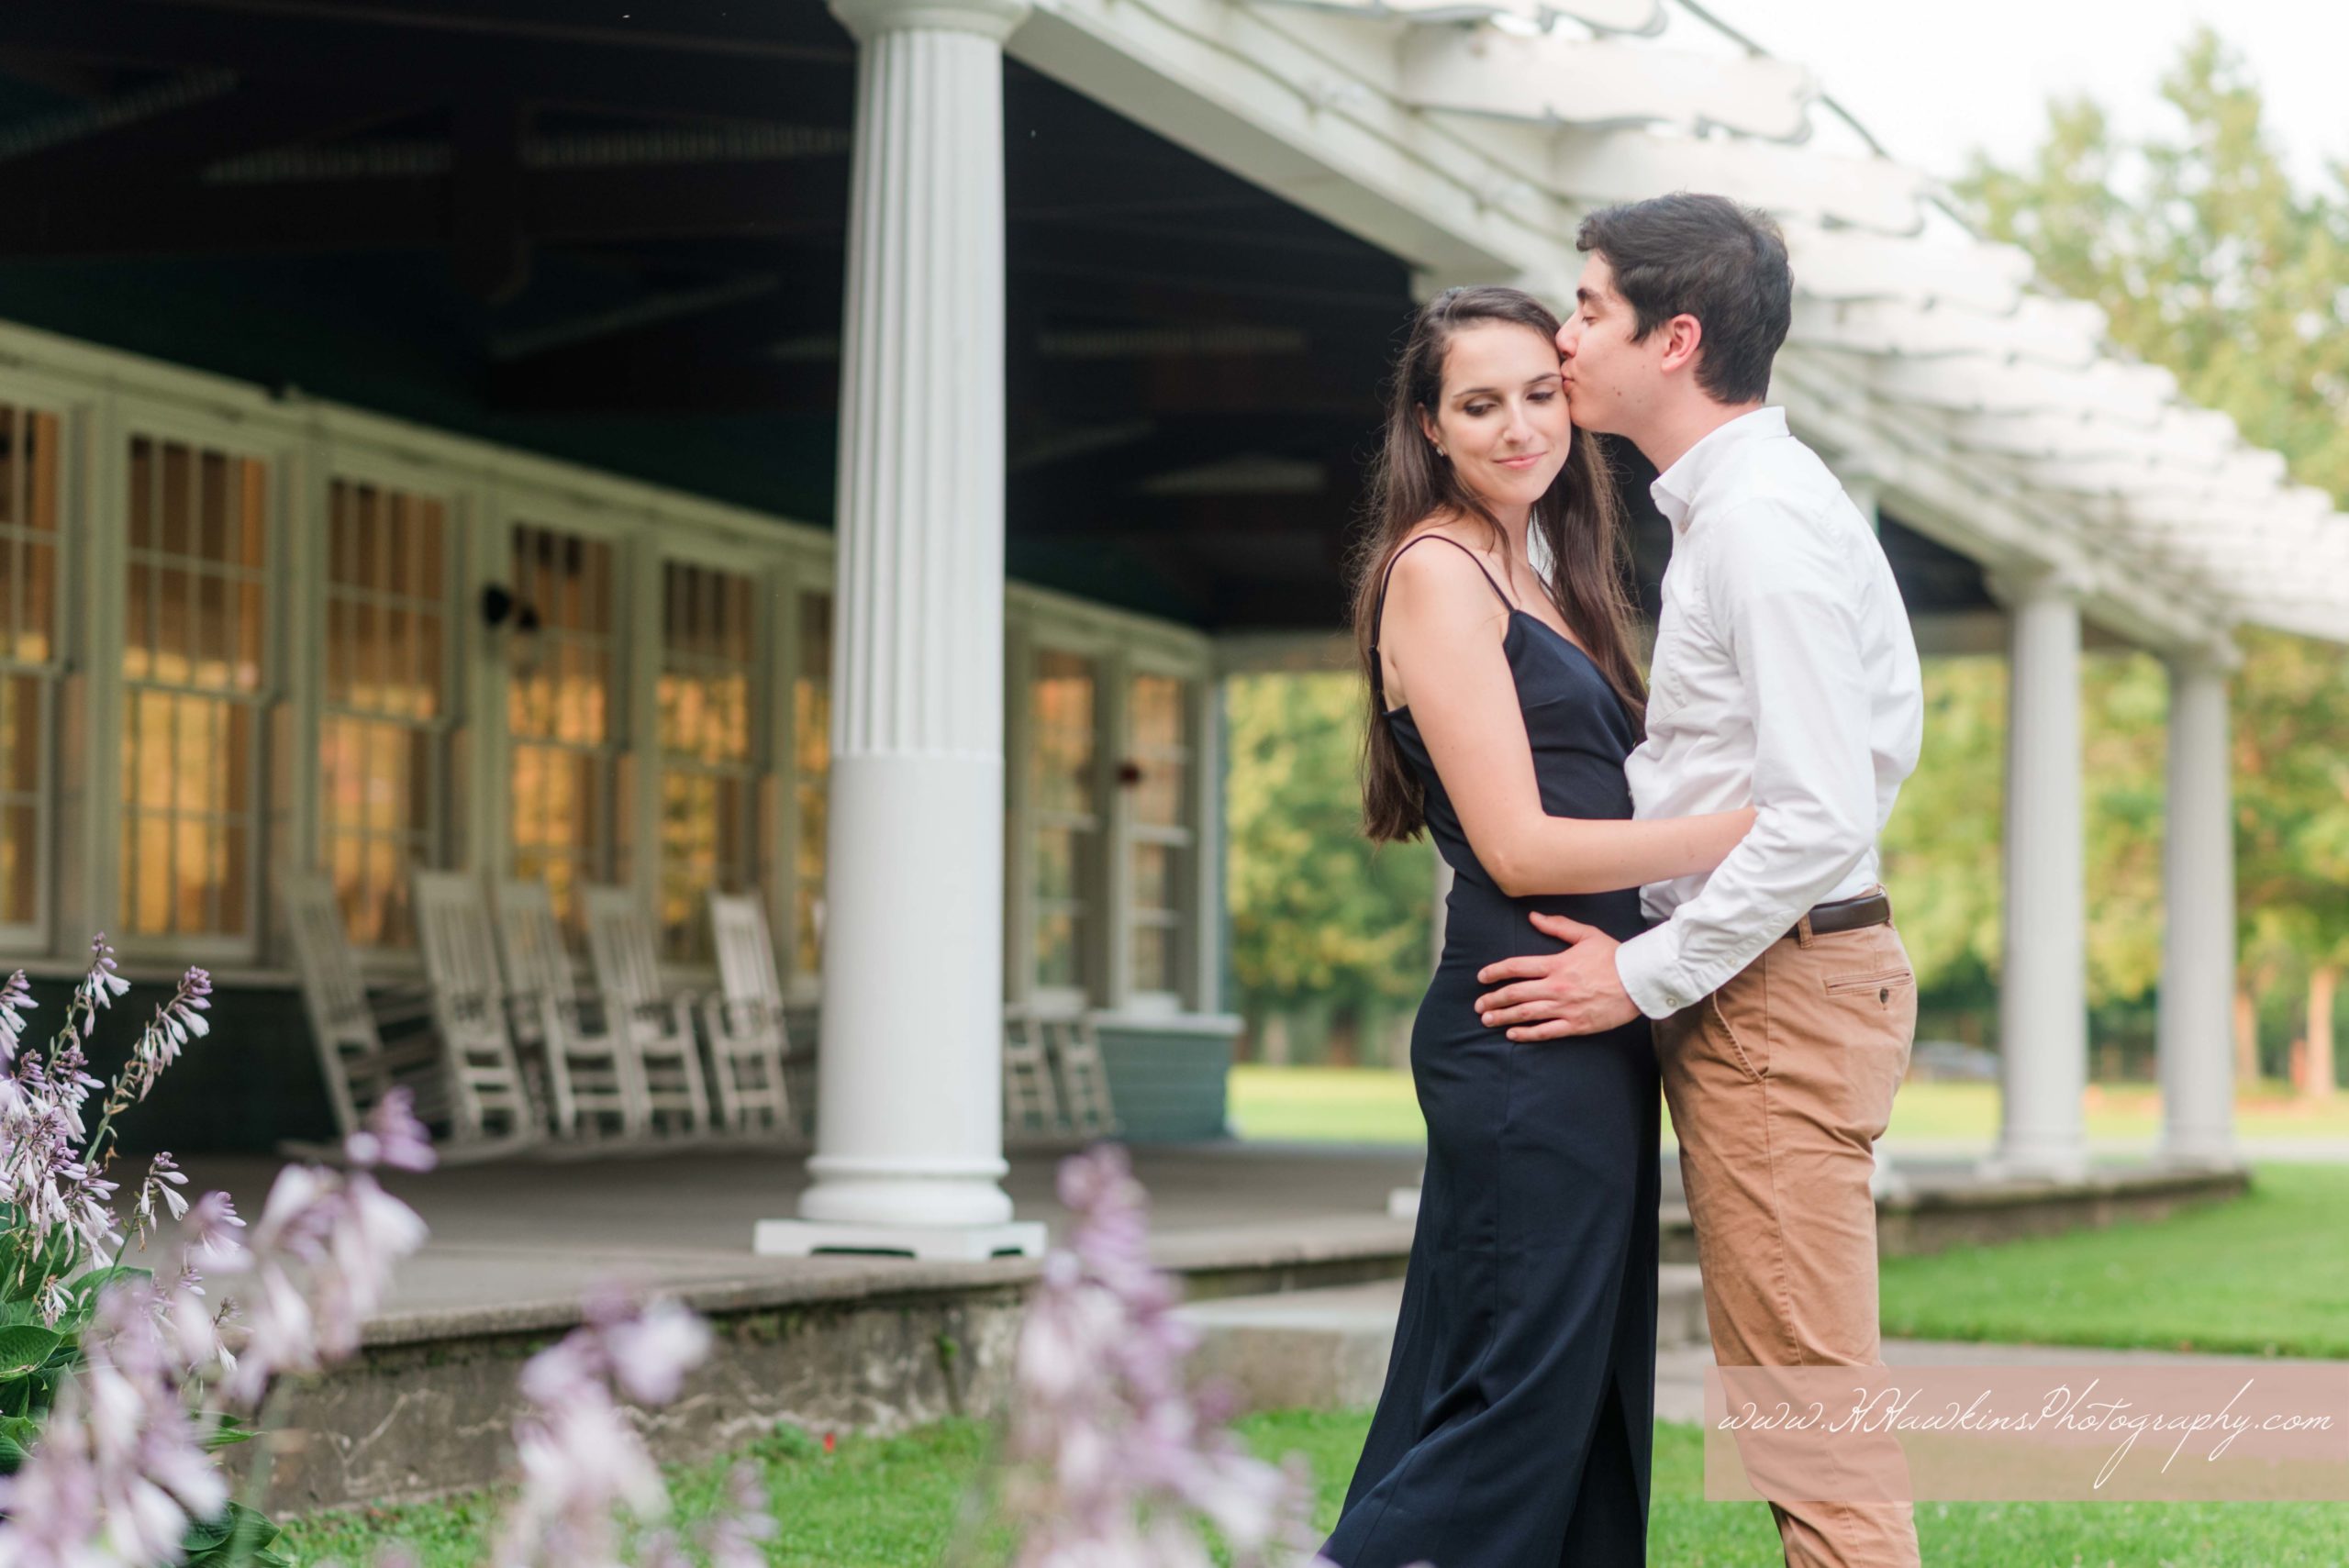 Groom kisses bride on the temple outside of Emerson Park pavilion in Auburn NY for their engagement pictures by Syracuse wedding photographer